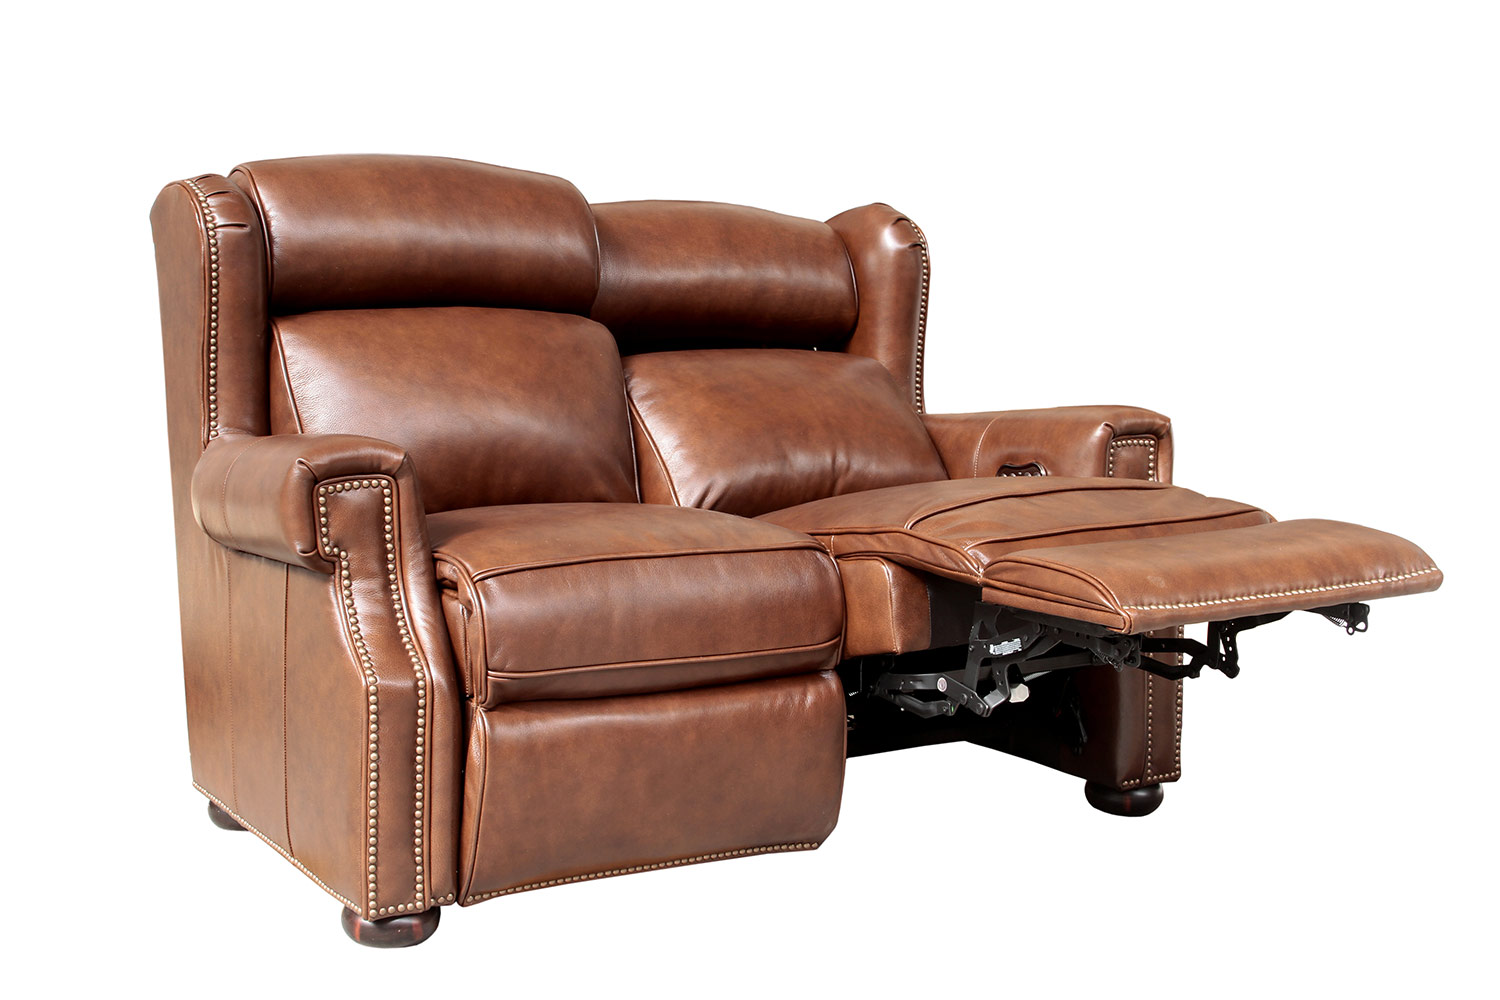 Barcalounger Benwick Power Reclining Loveseat with Power Head Rests - Shoreham Chocolate/All Leather